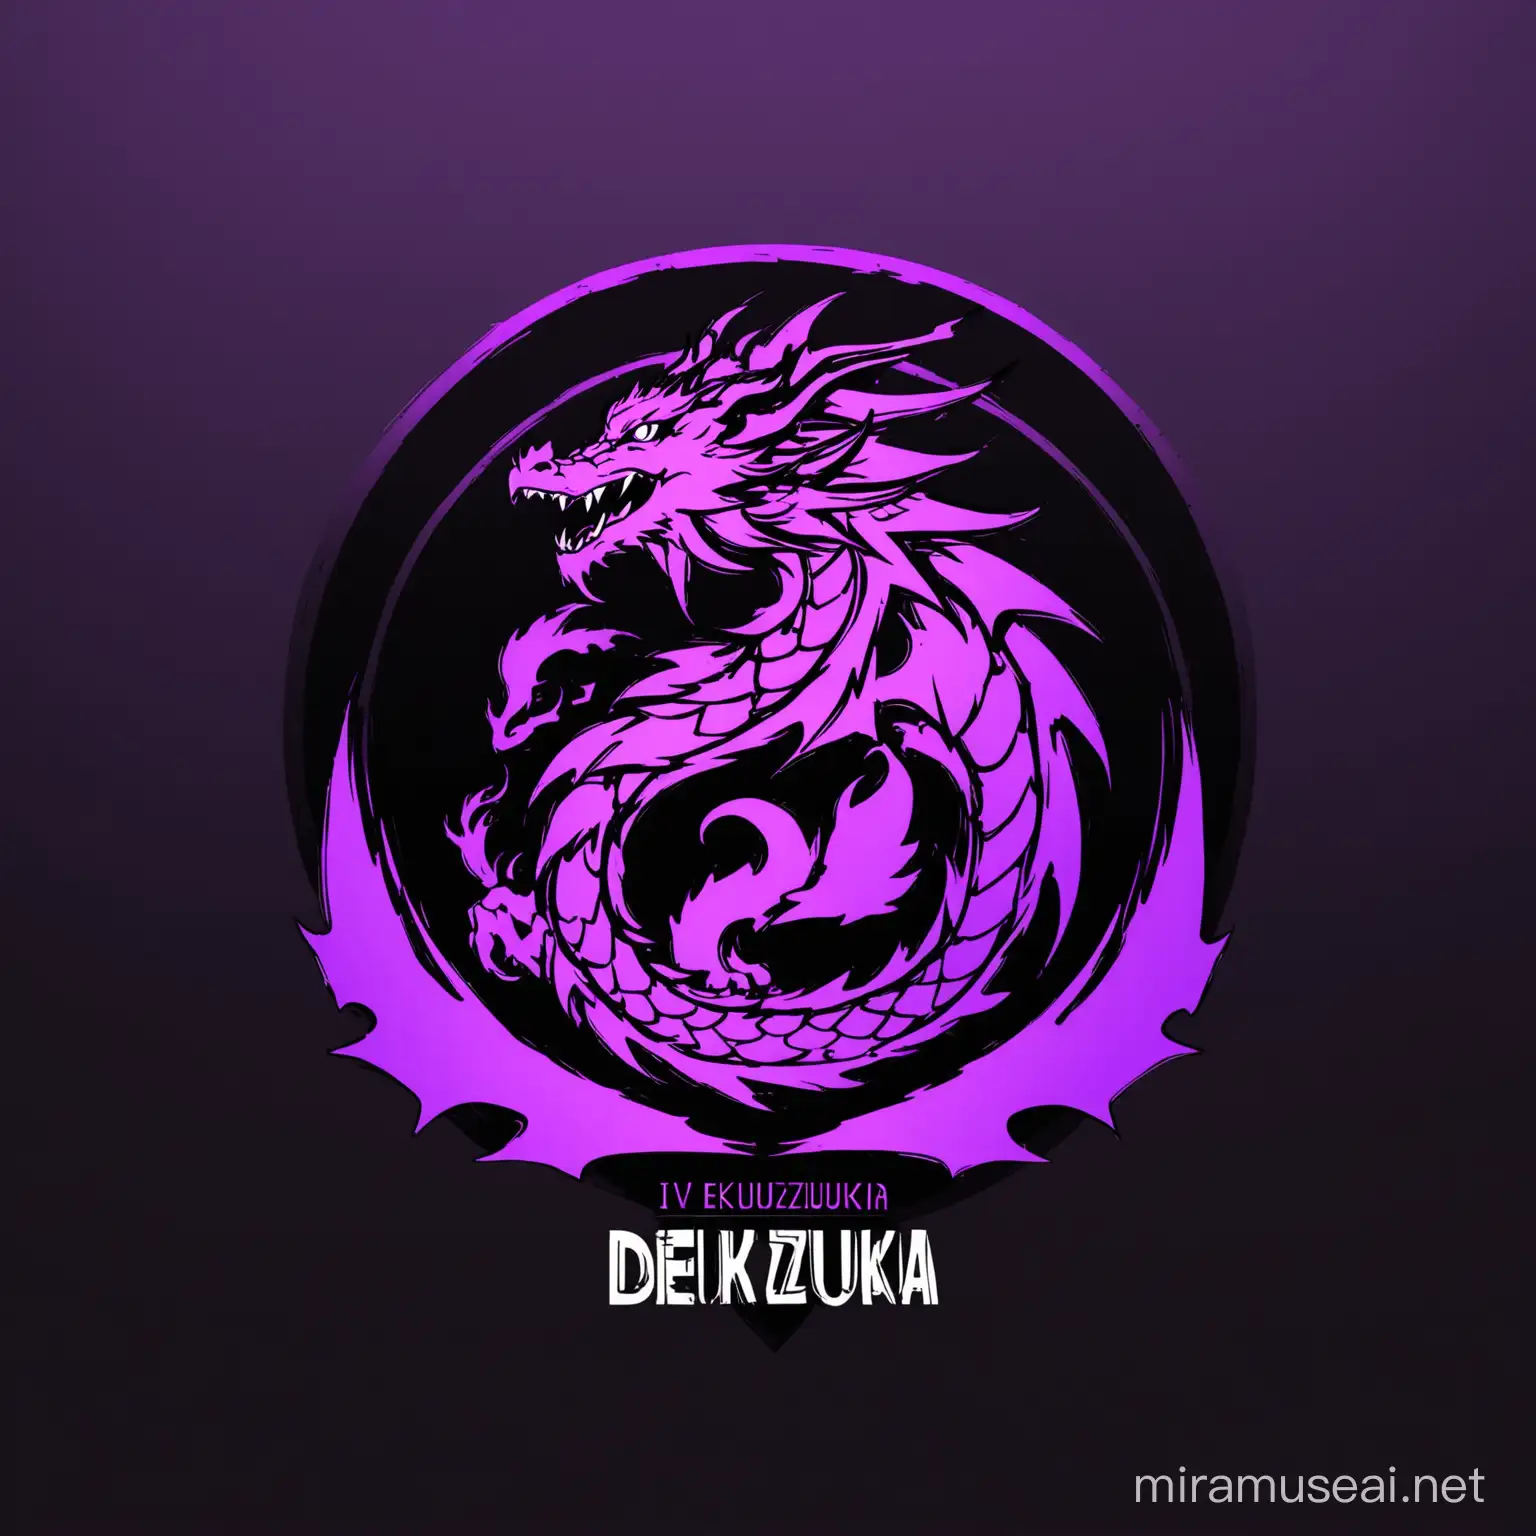 DragonEmblazoned Capital Crest for YouTube Display in Purple and Black Minimal Style